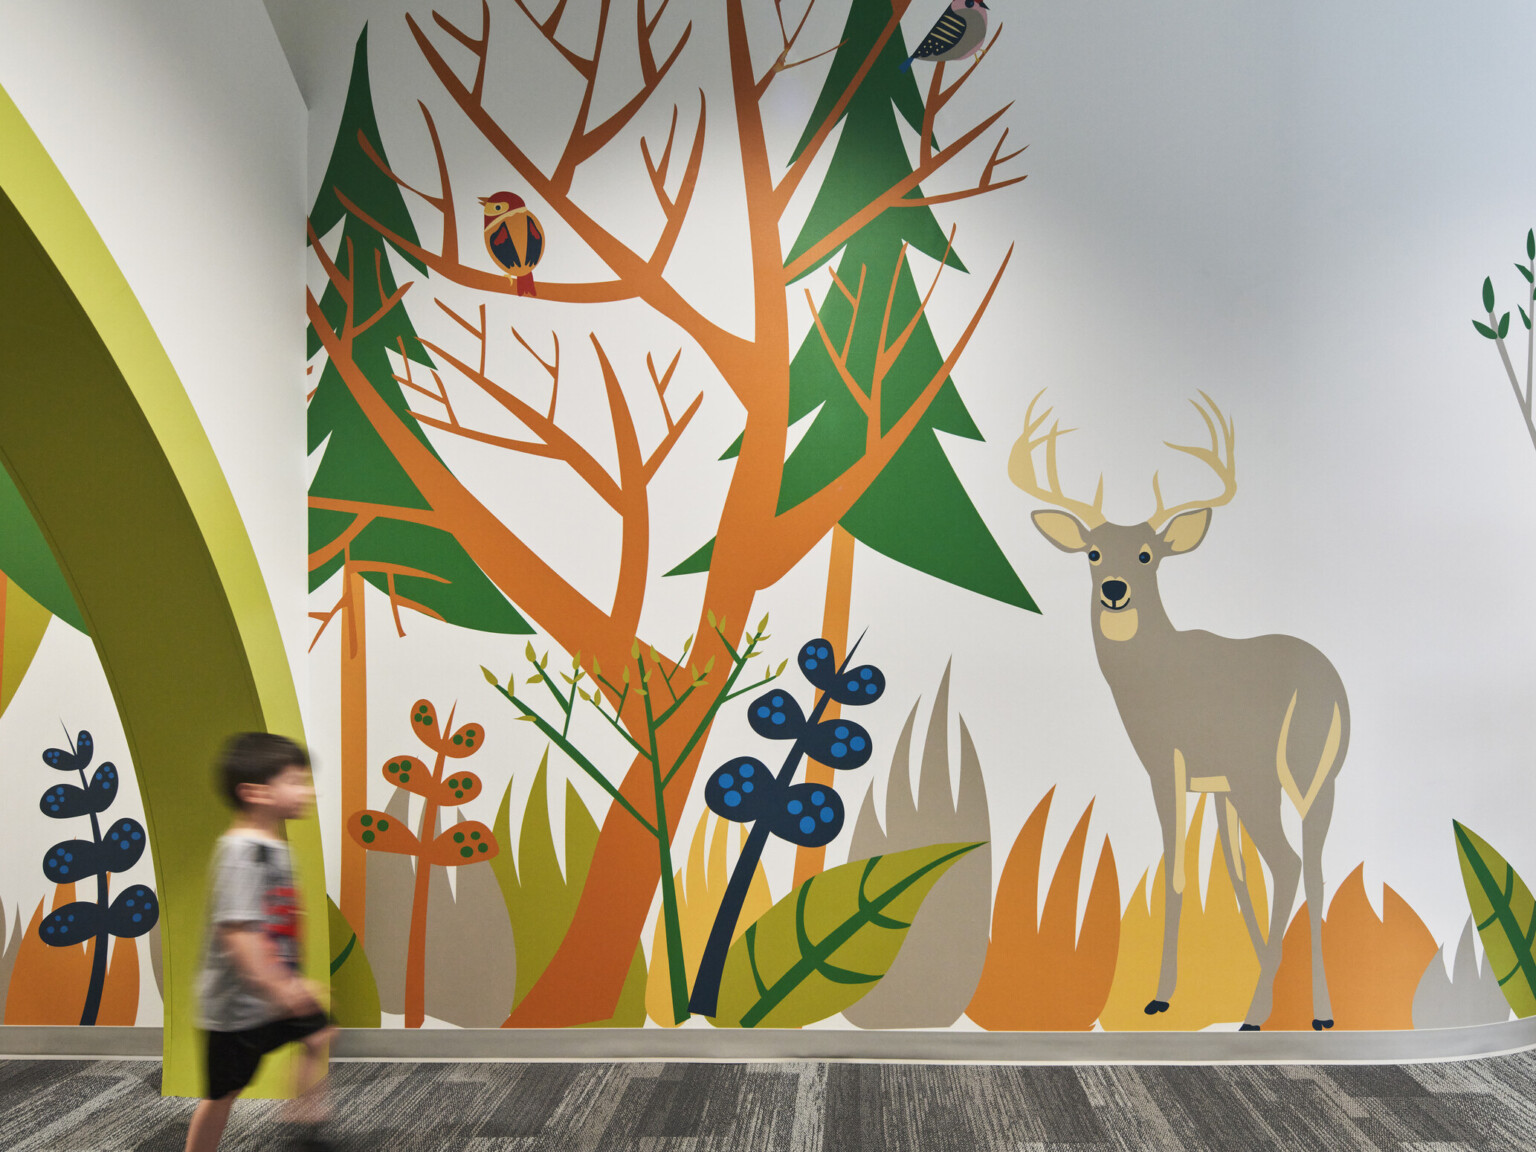 Child walks by colorful mural of cartoon forest and animals in carpeted school hallway, mixed trees, deer, owl, racoon